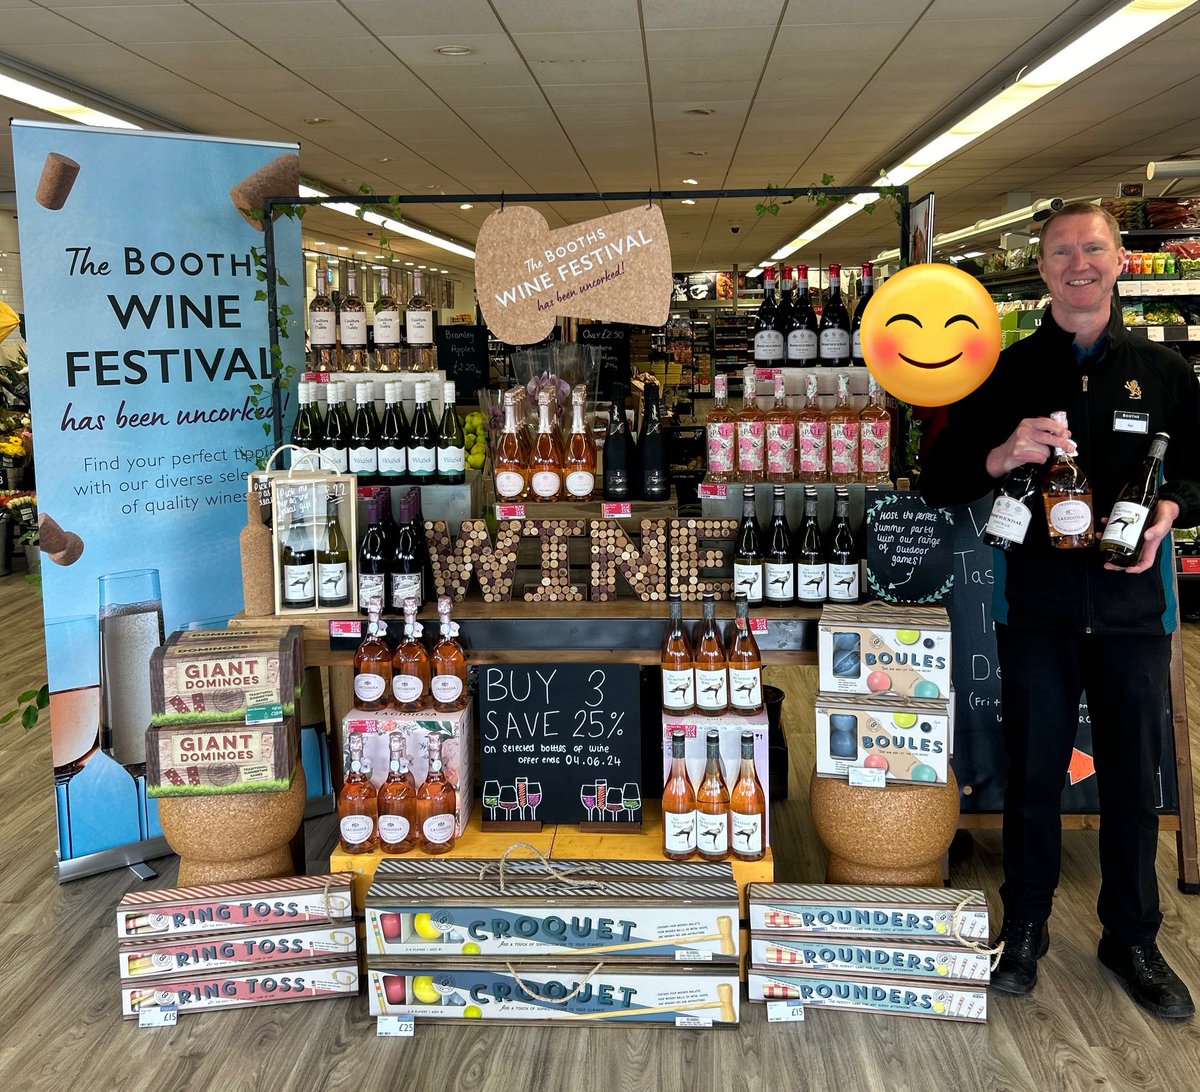 Ian is reminding you of our buy 3, save 25% wine offer at Longridge 🍷 

Booths operate a think 25 policy. Please drink responsibly.